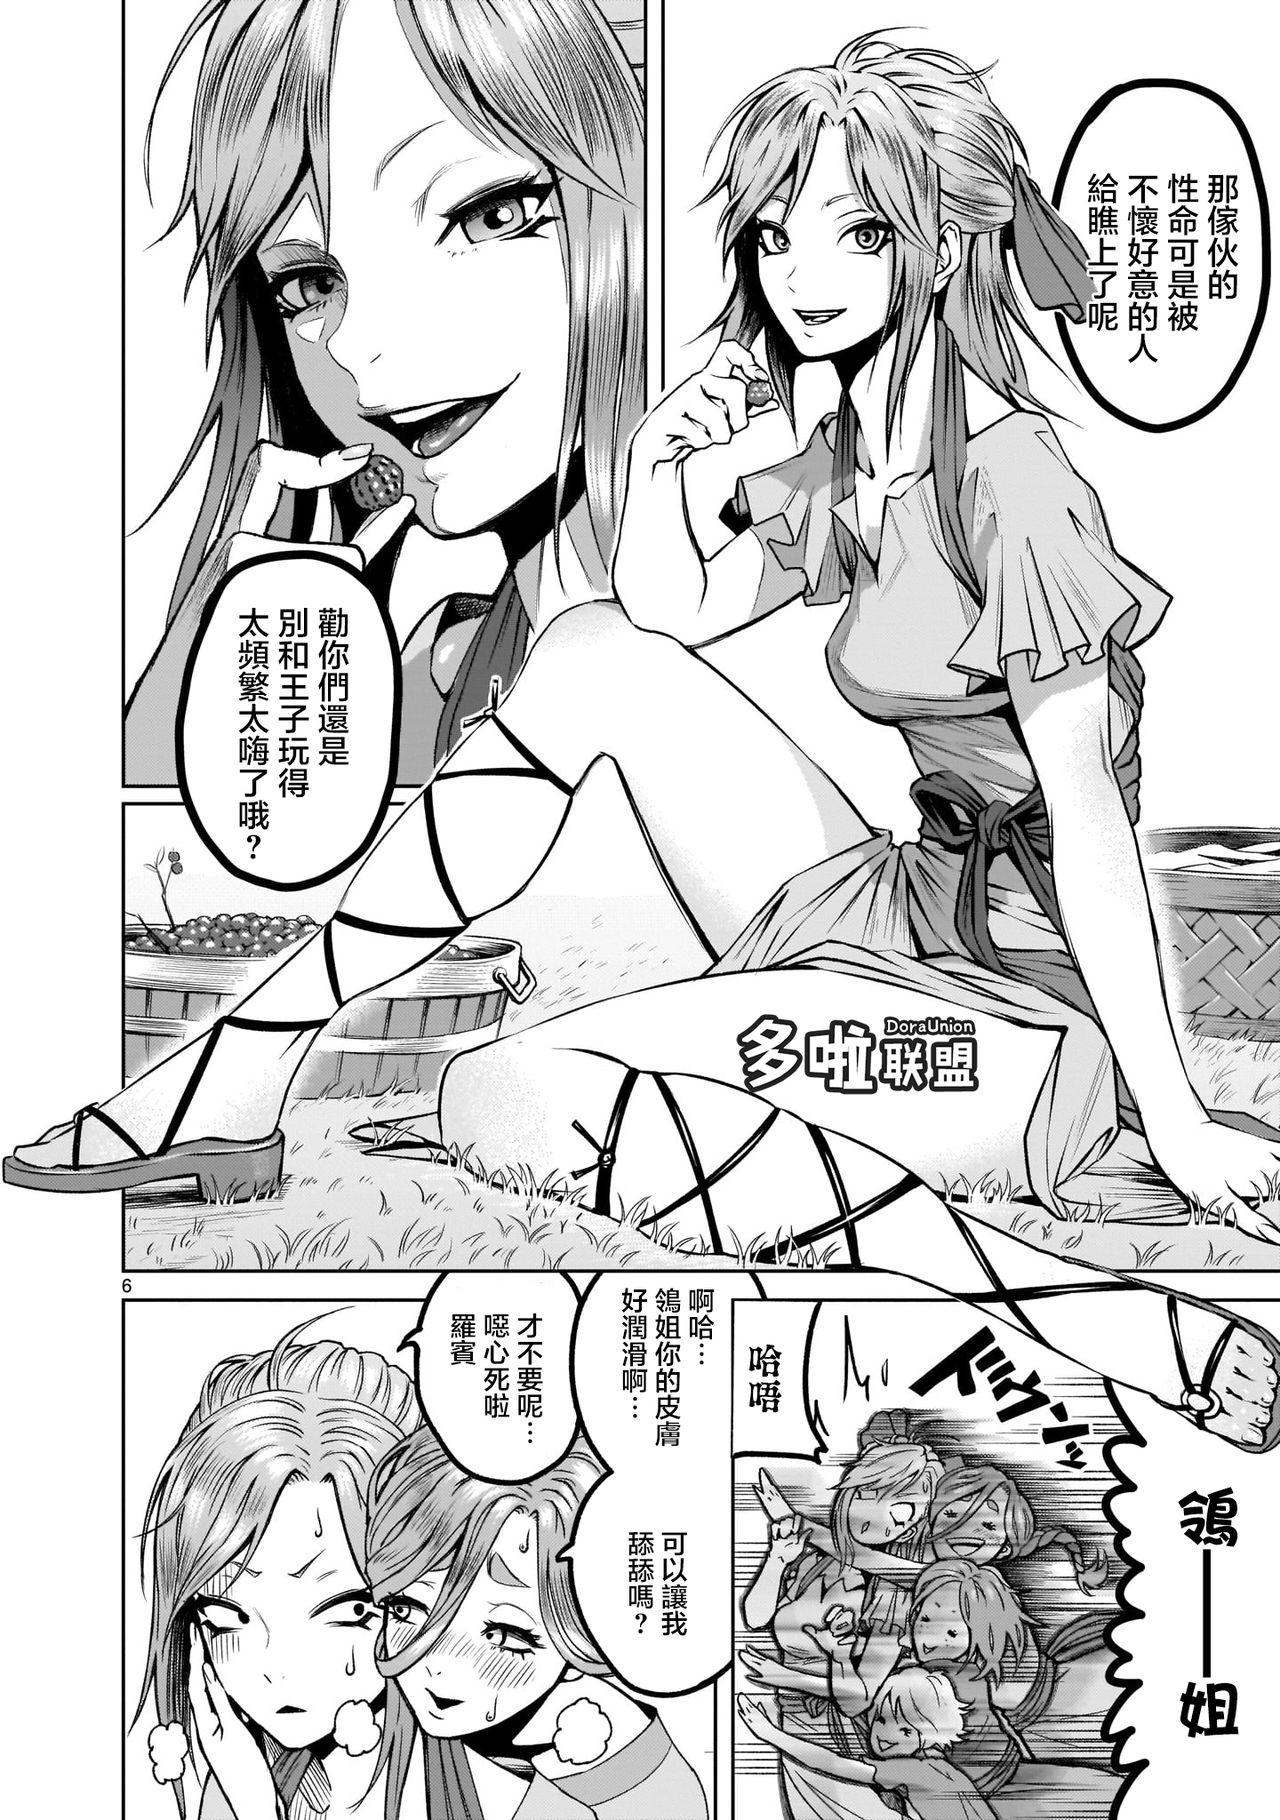 Pigtails 蔷薇园传奇 01-08 Chinese Vadia - Page 7